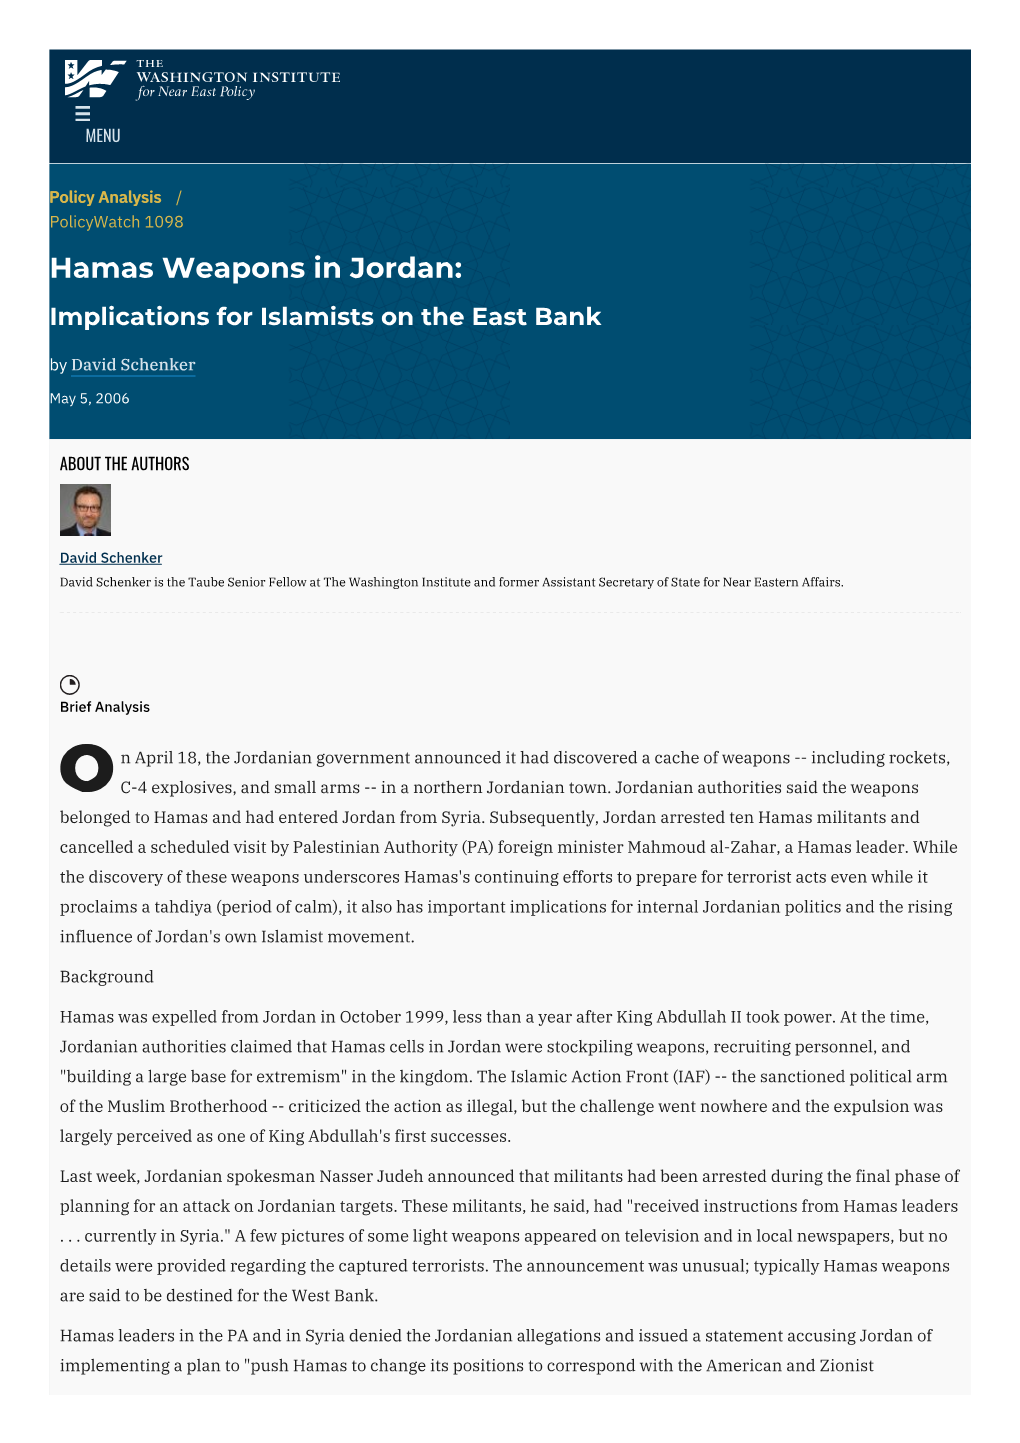 Hamas Weapons in Jordan: Implications for Islamists on the East Bank by David Schenker